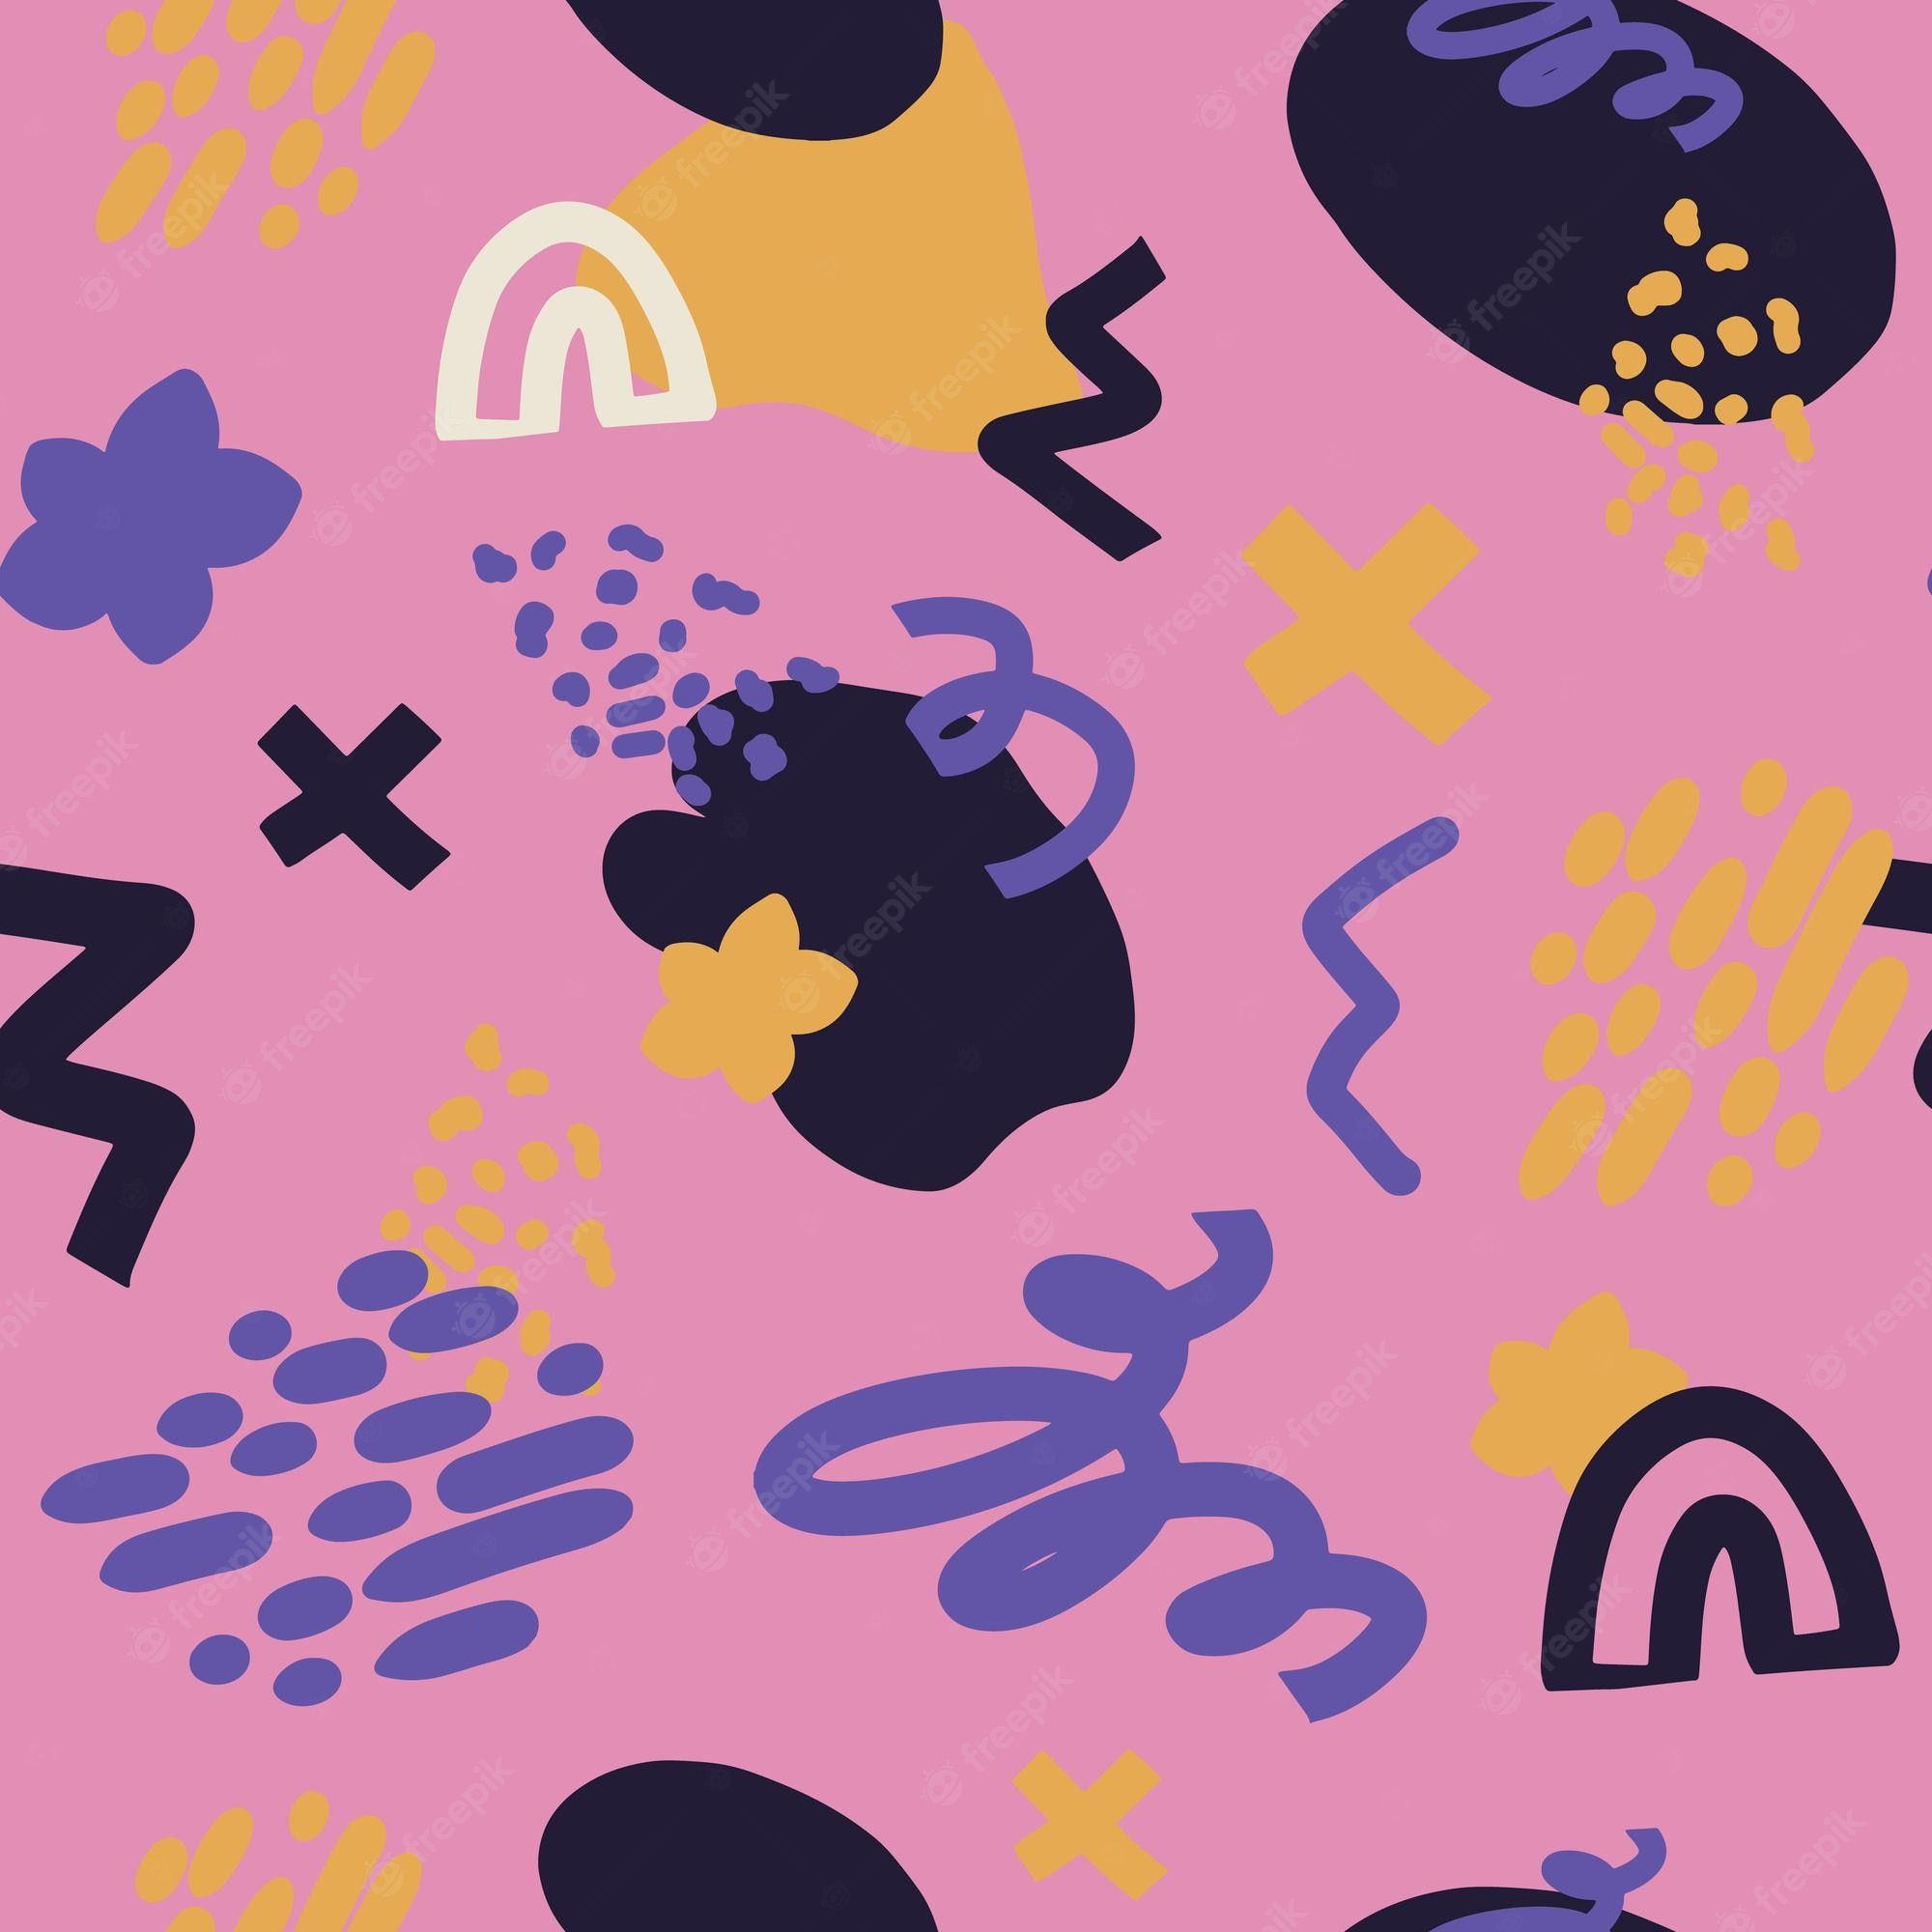 A seamless pattern with colorful shapes and lines - 2000s